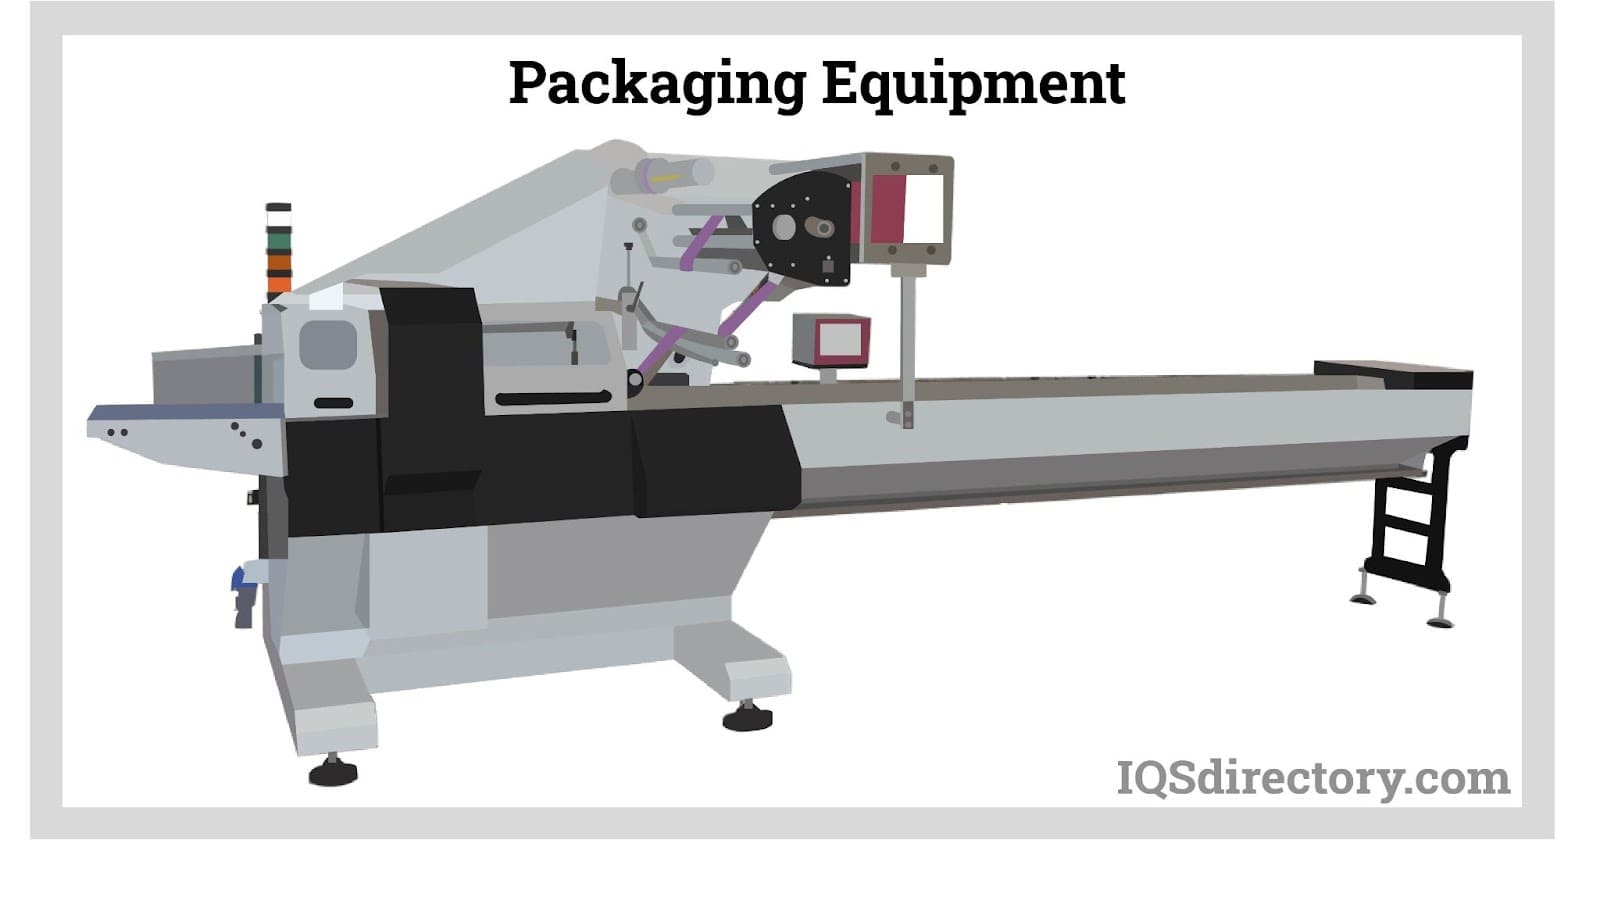 Private Label Packaging – ActionPak, Inc.